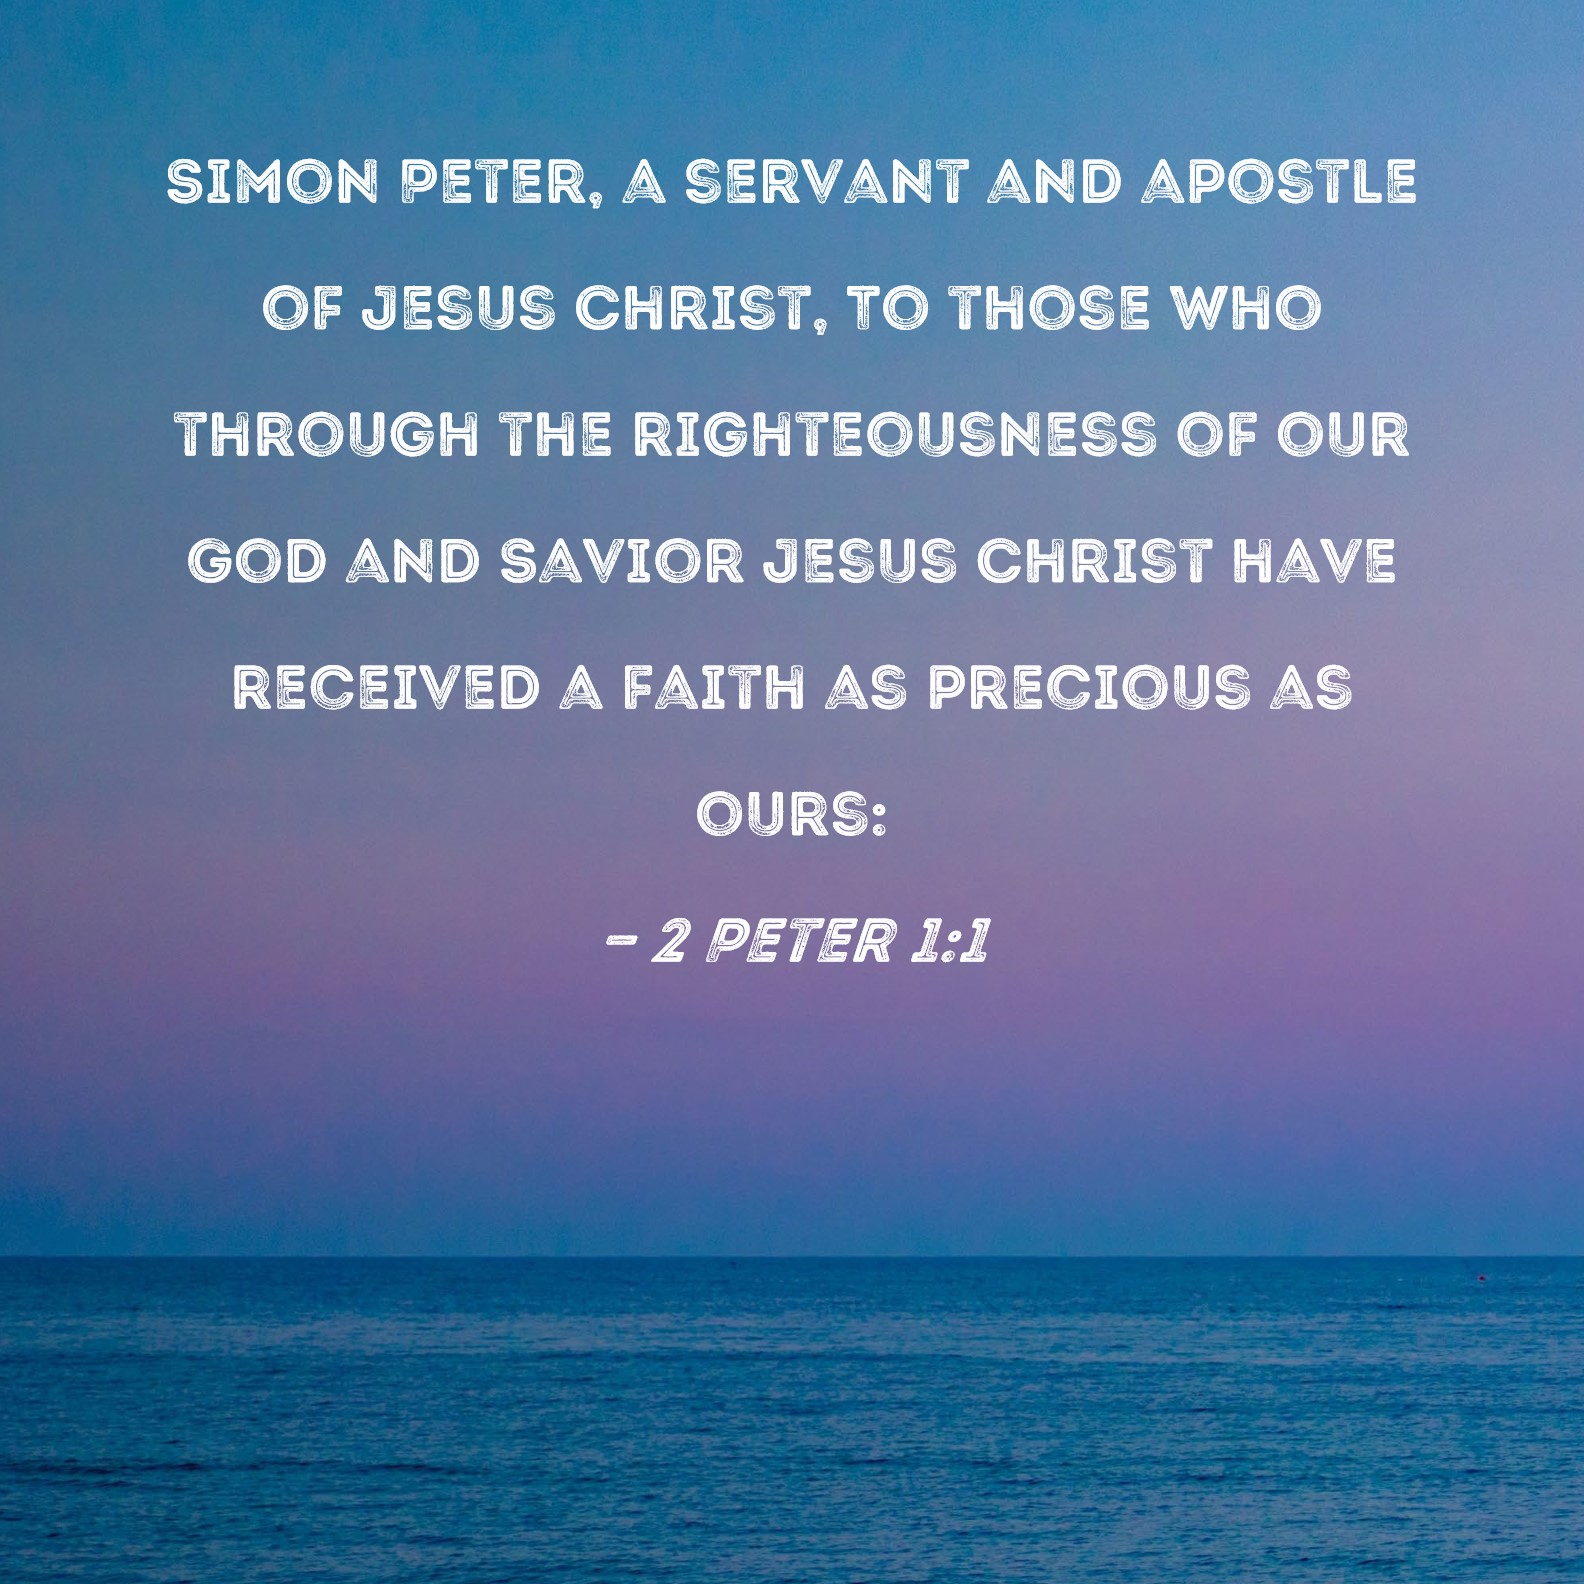 2-peter-1-1-simon-peter-a-servant-and-apostle-of-jesus-christ-to